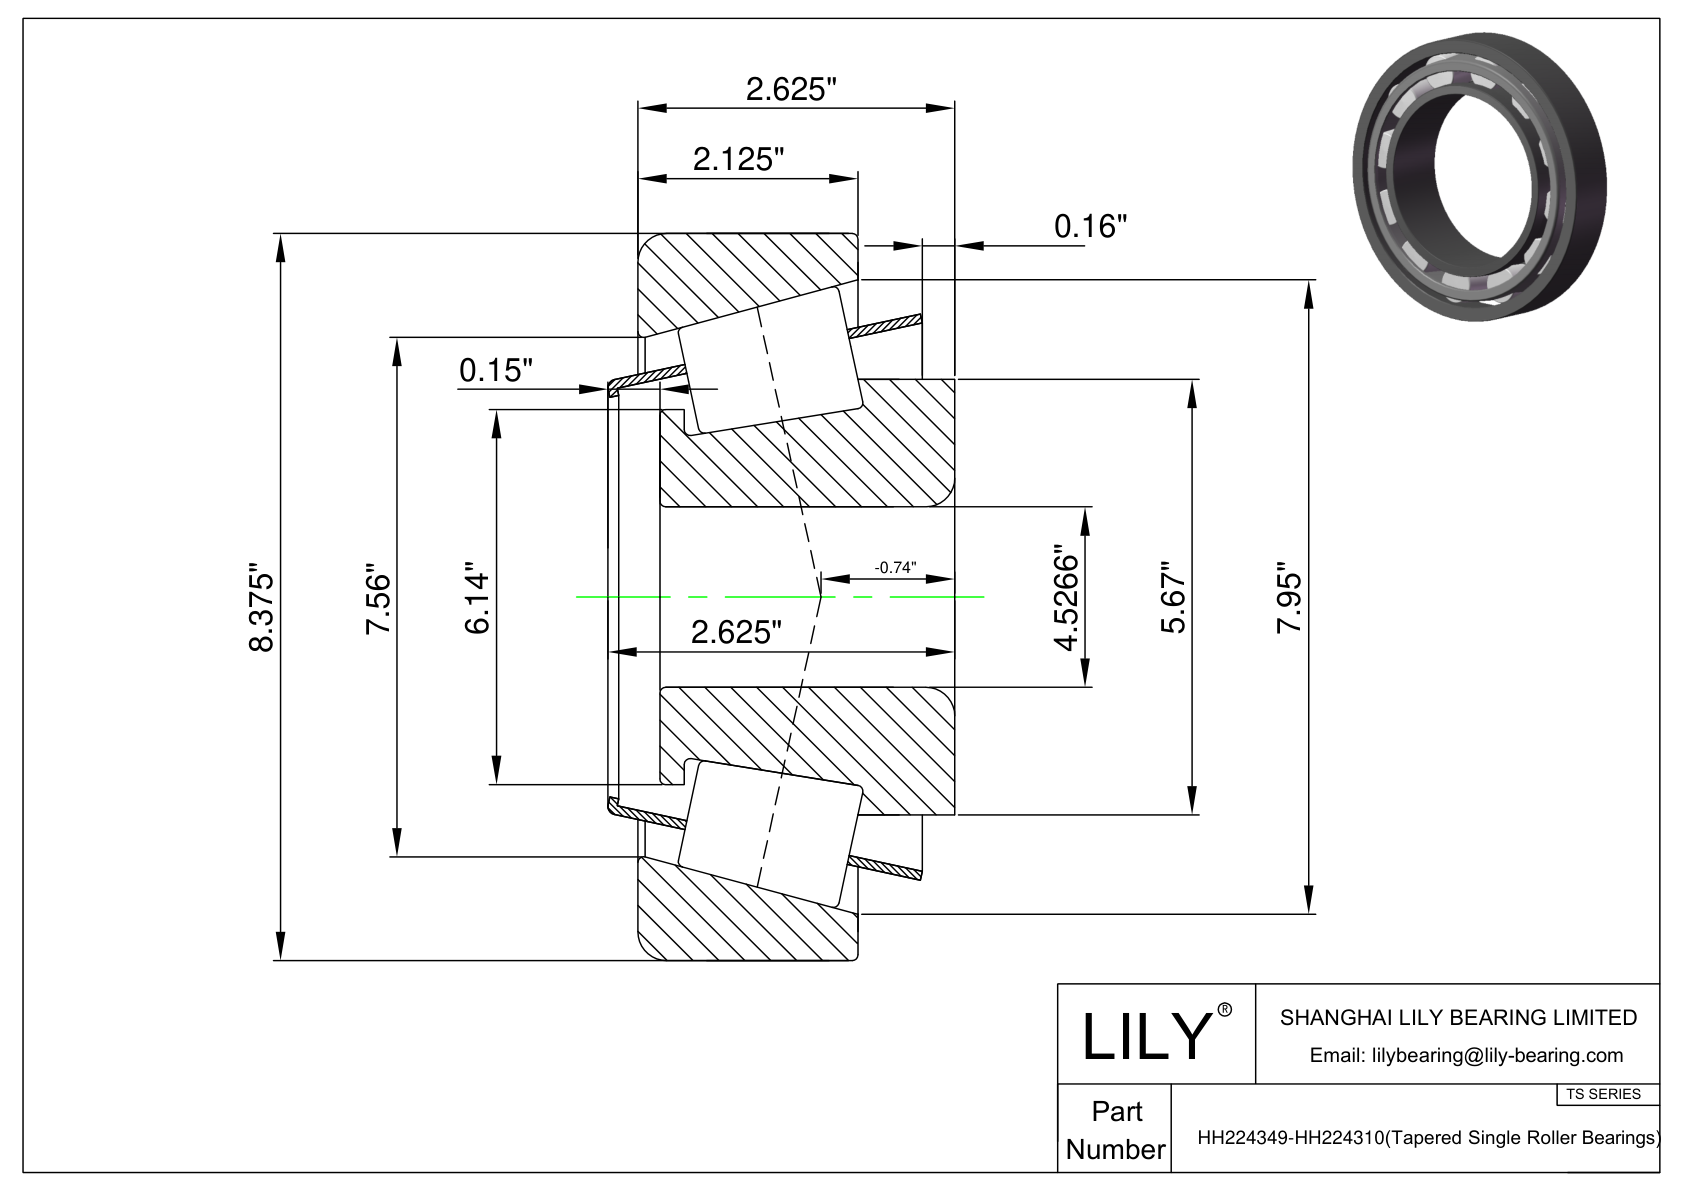 HH224349-HH224310 TS (Tapered Single Roller Bearings) (Imperial) cad drawing